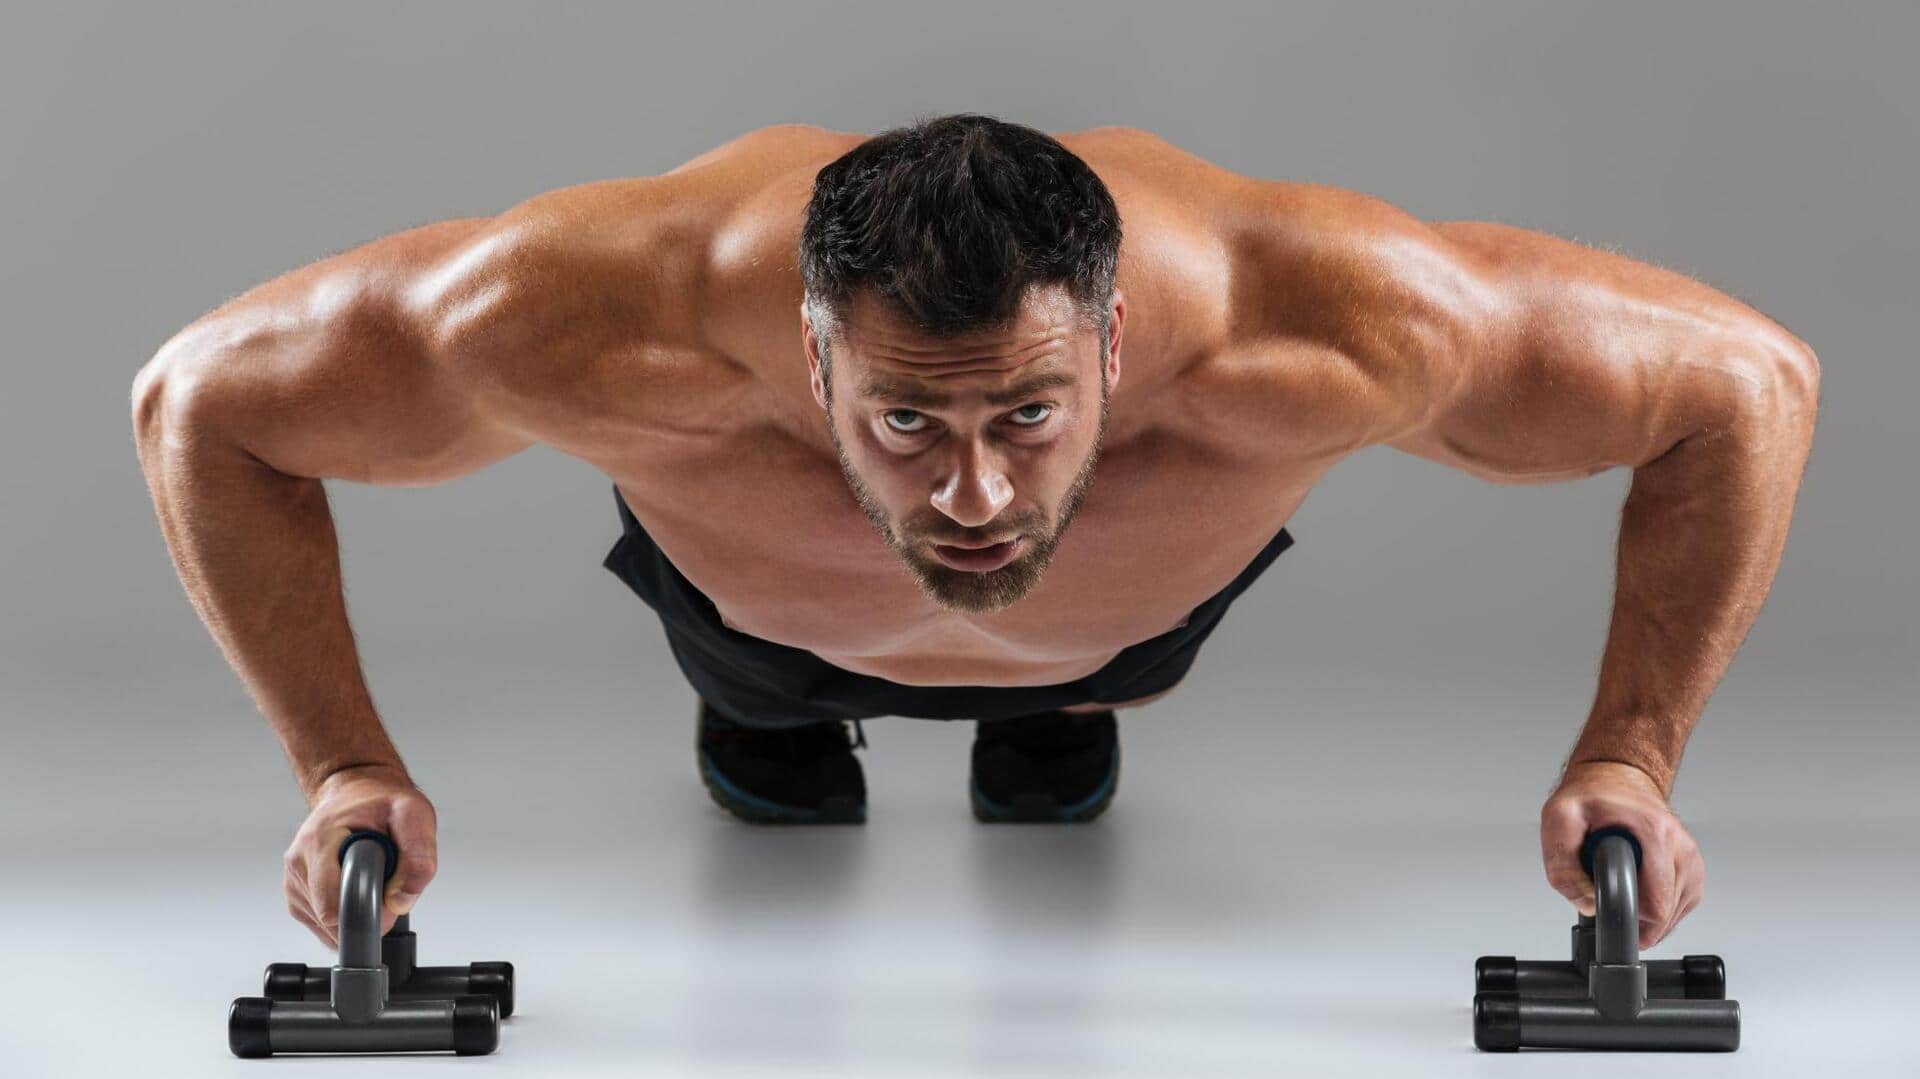 Easy push-up bar exercises for your workout routine